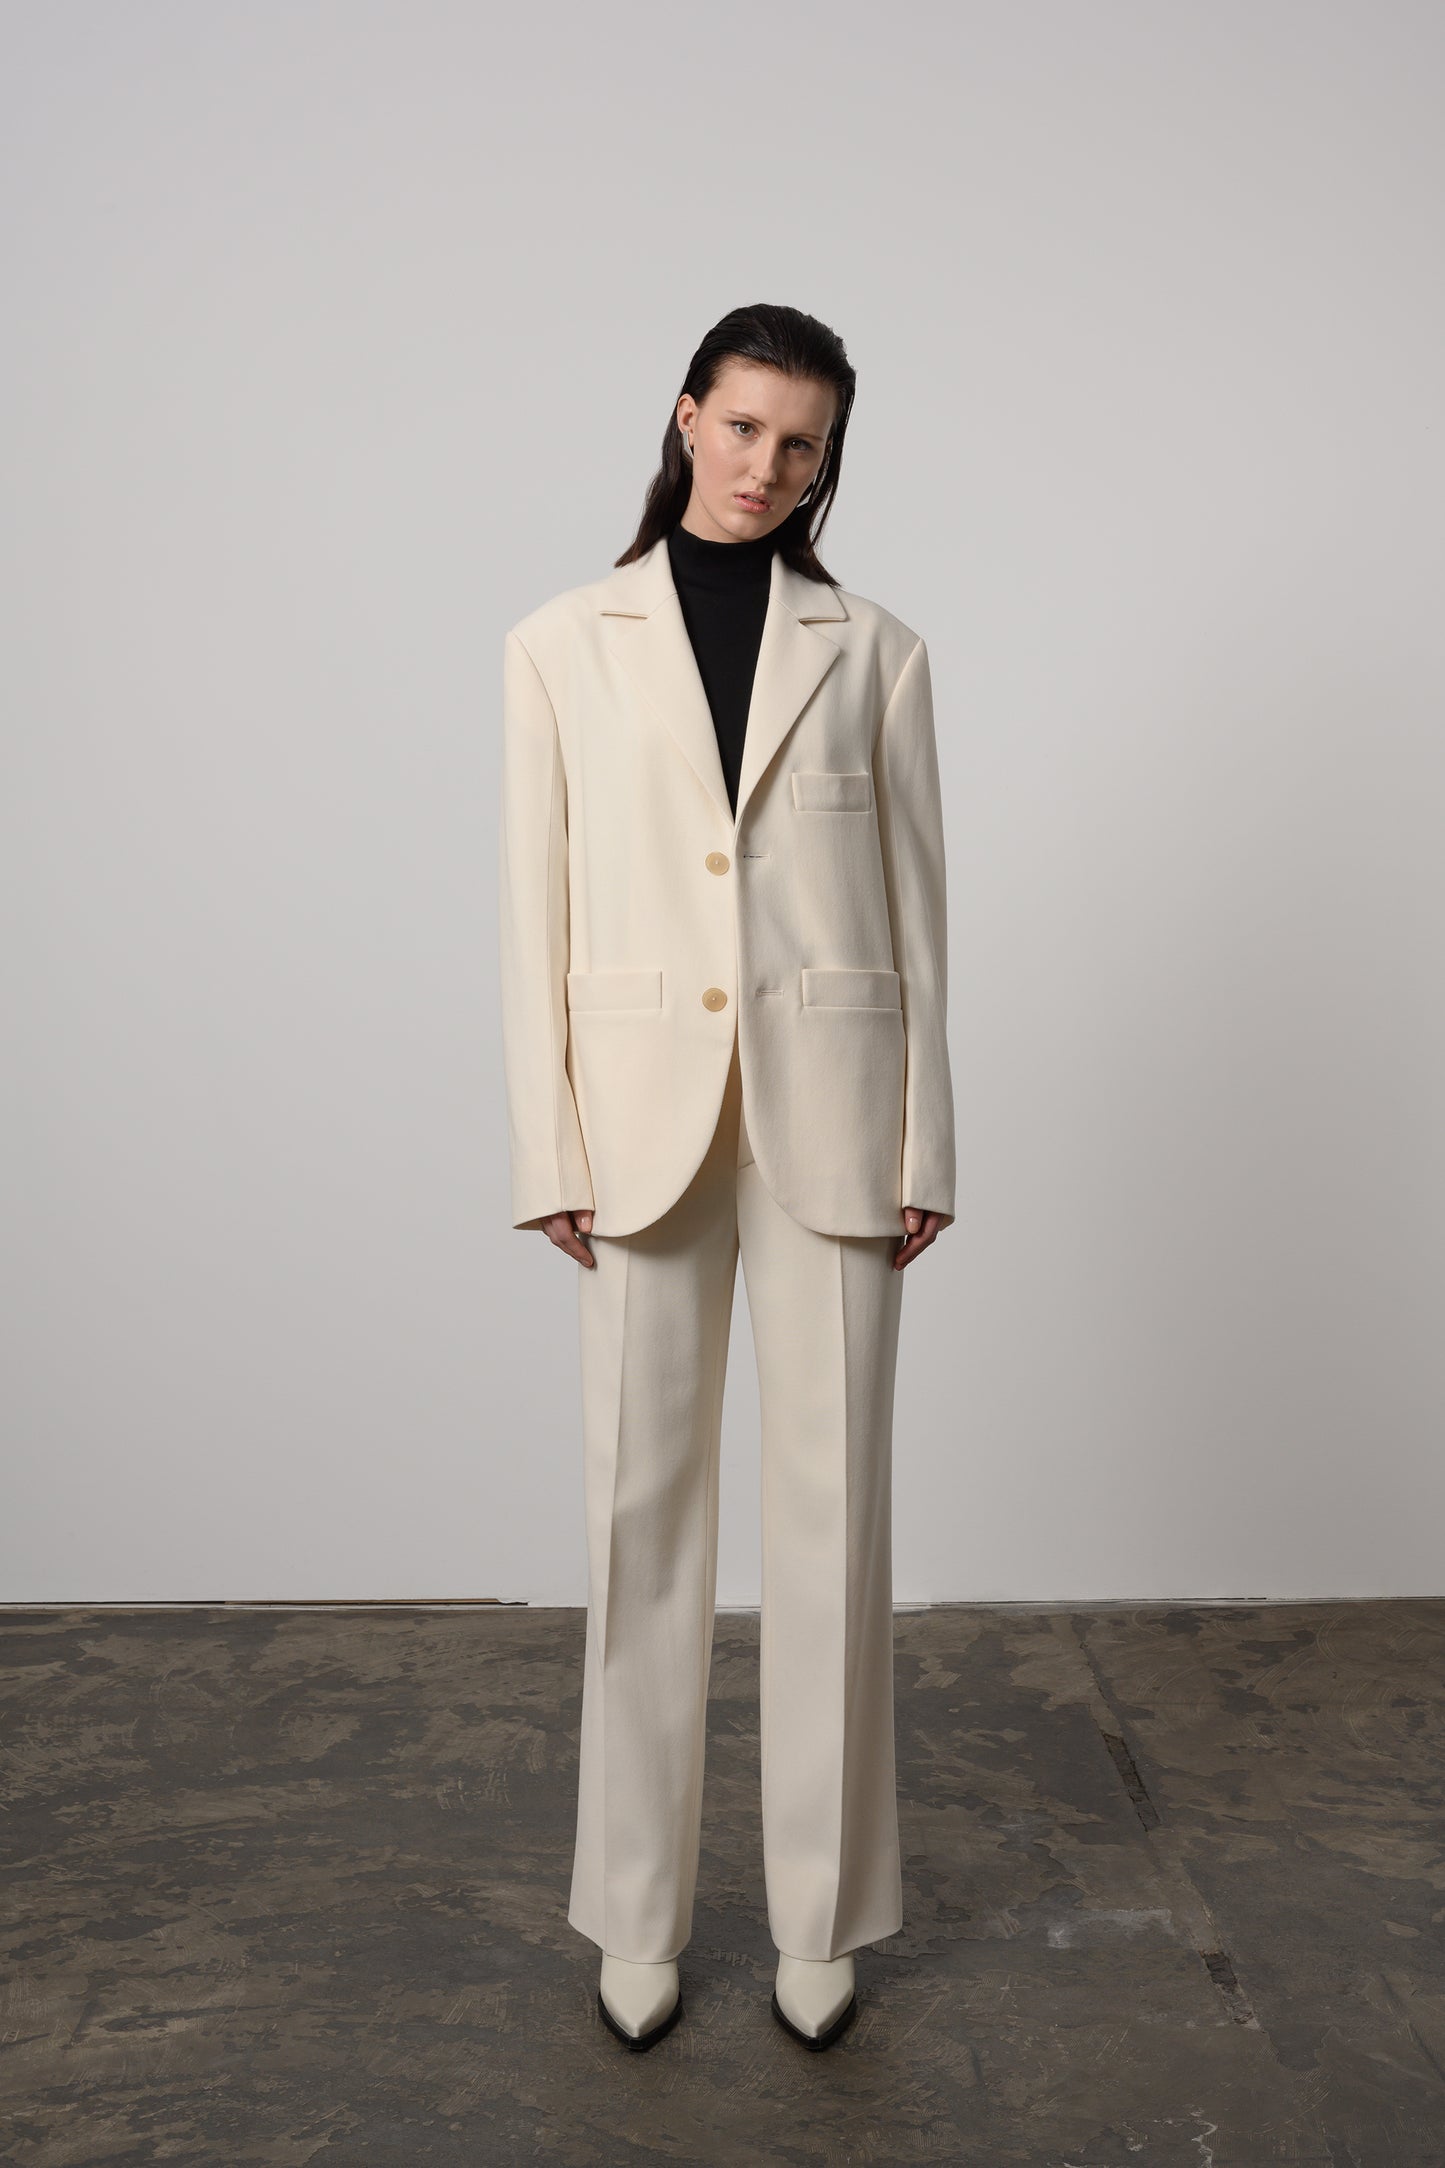 Classic off-white oversized unisex blazer made from Italian wool, featuring notched lapels and a double-button closure for a timeless and sophisticated look.